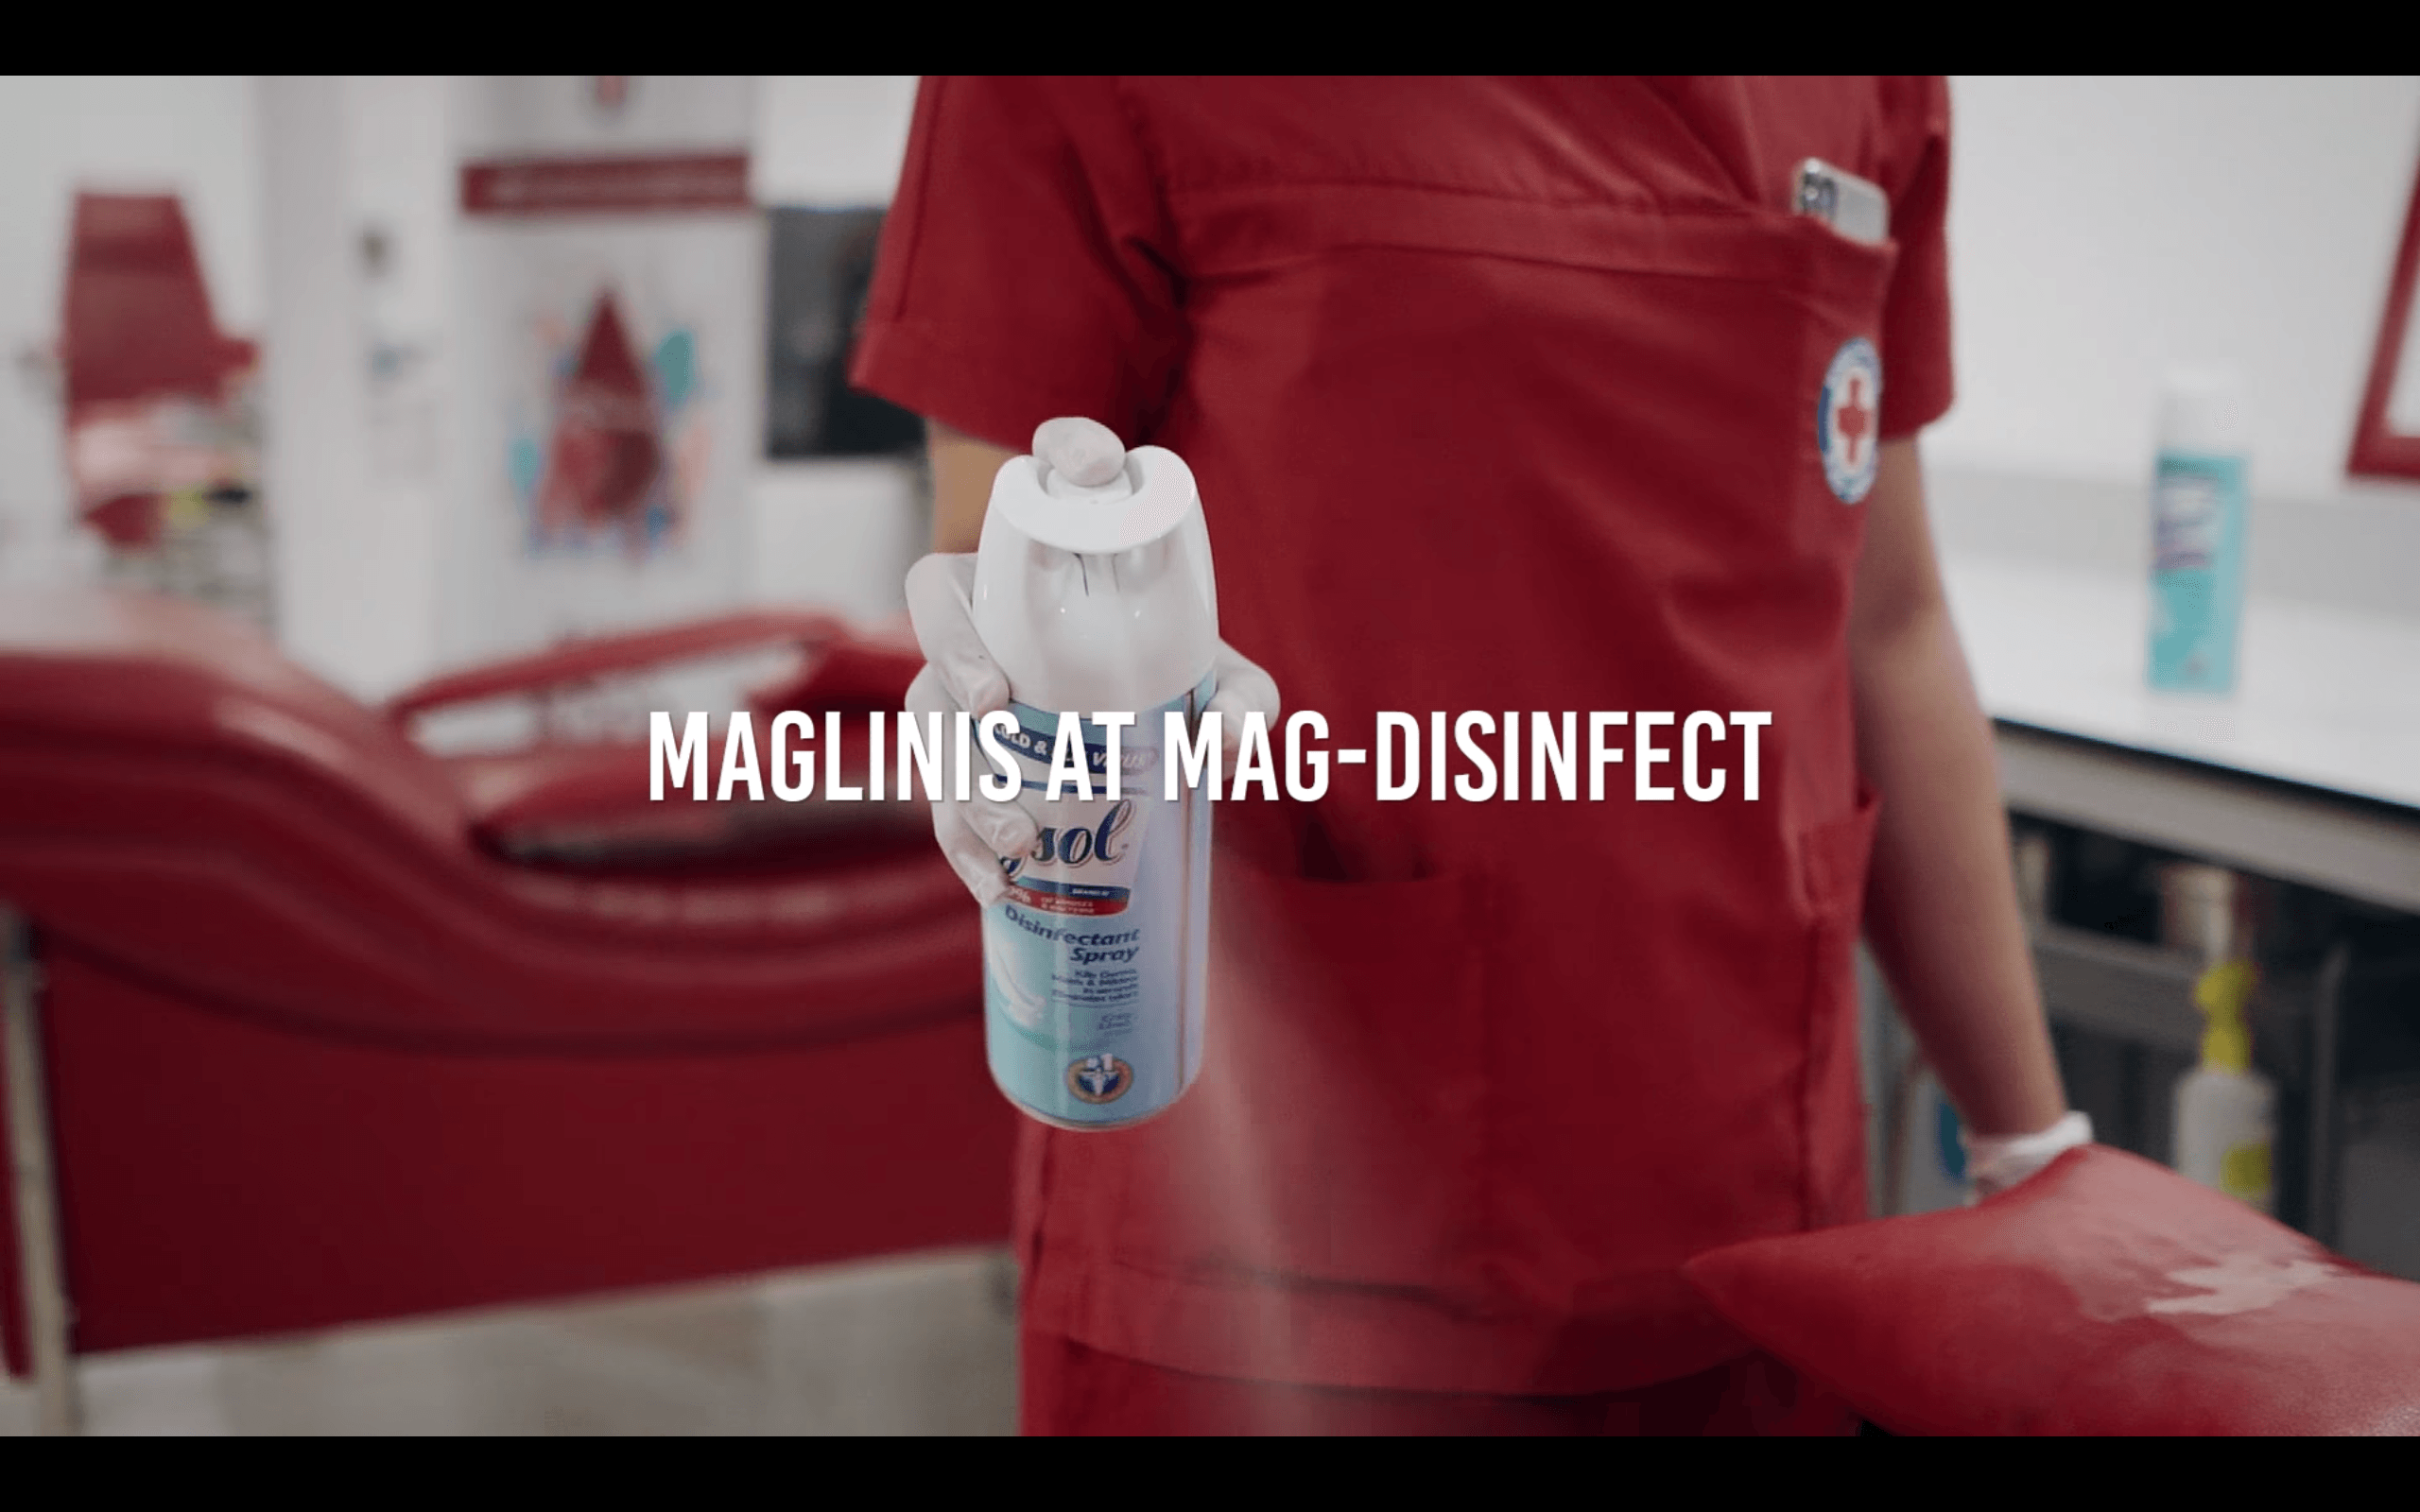 Lysol urges Filipinos: ‘Together, we can disinfect to protect’